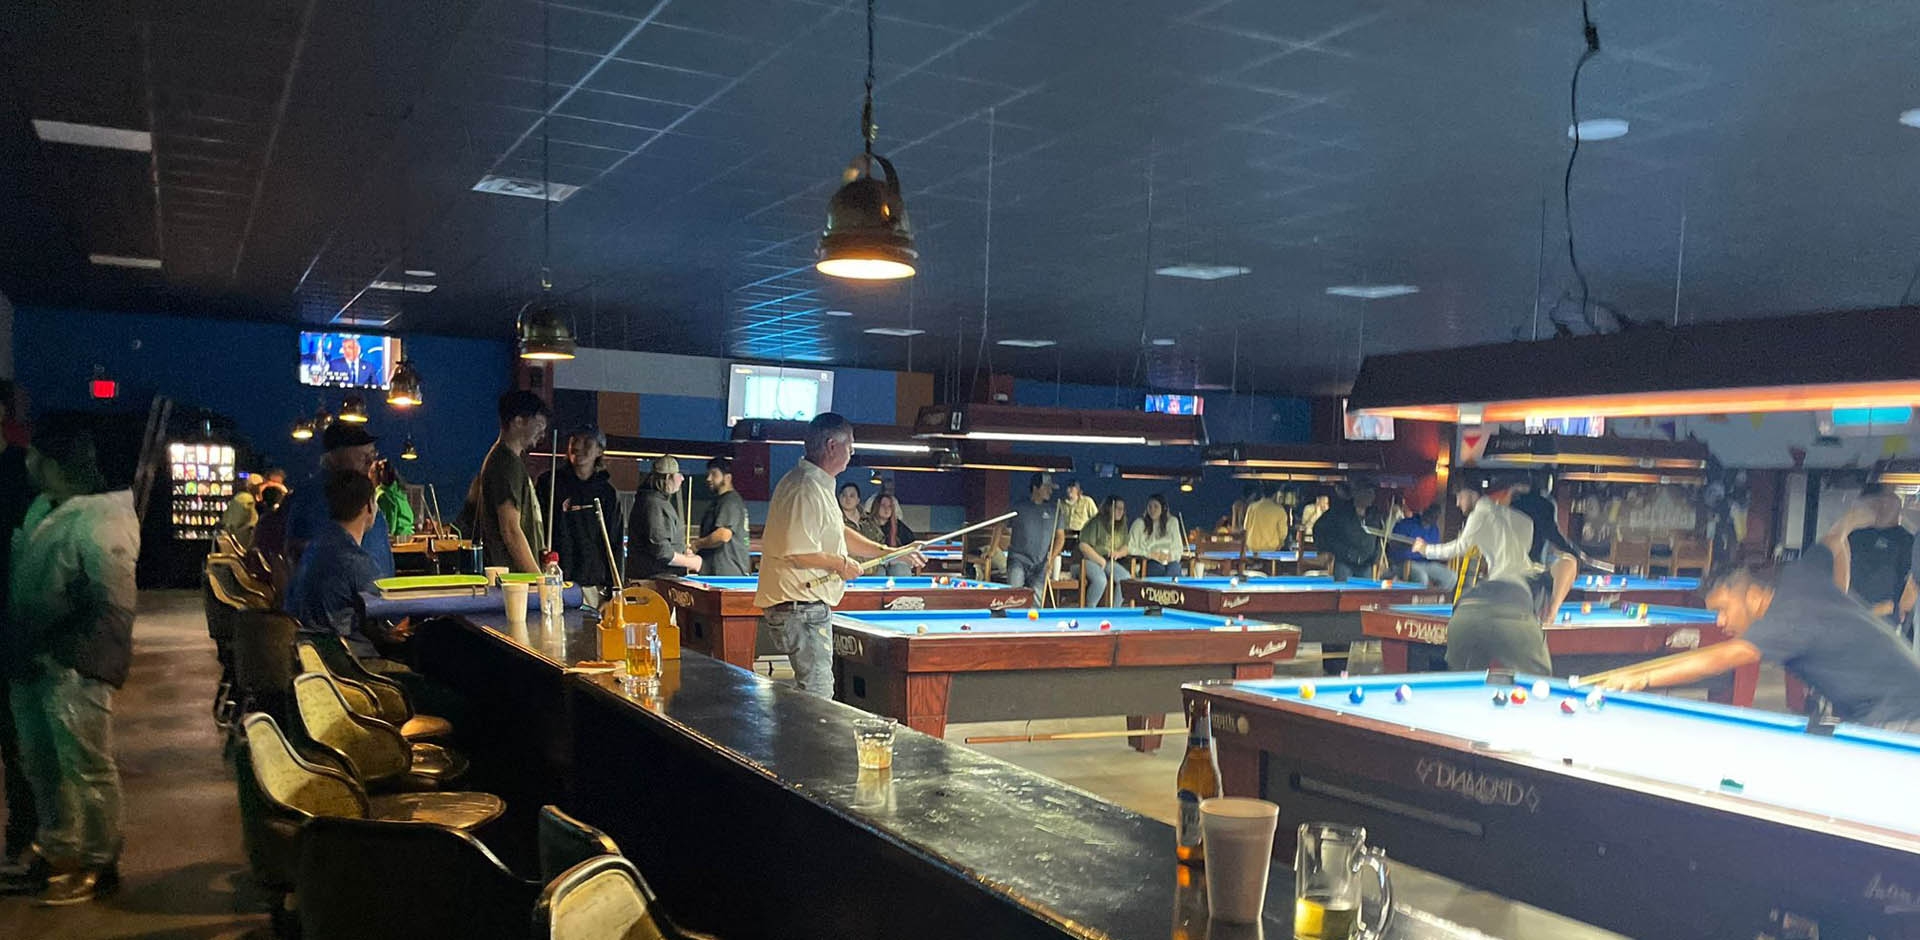 WELCOME TO ARENA BILLIARDS BAR & GRILL